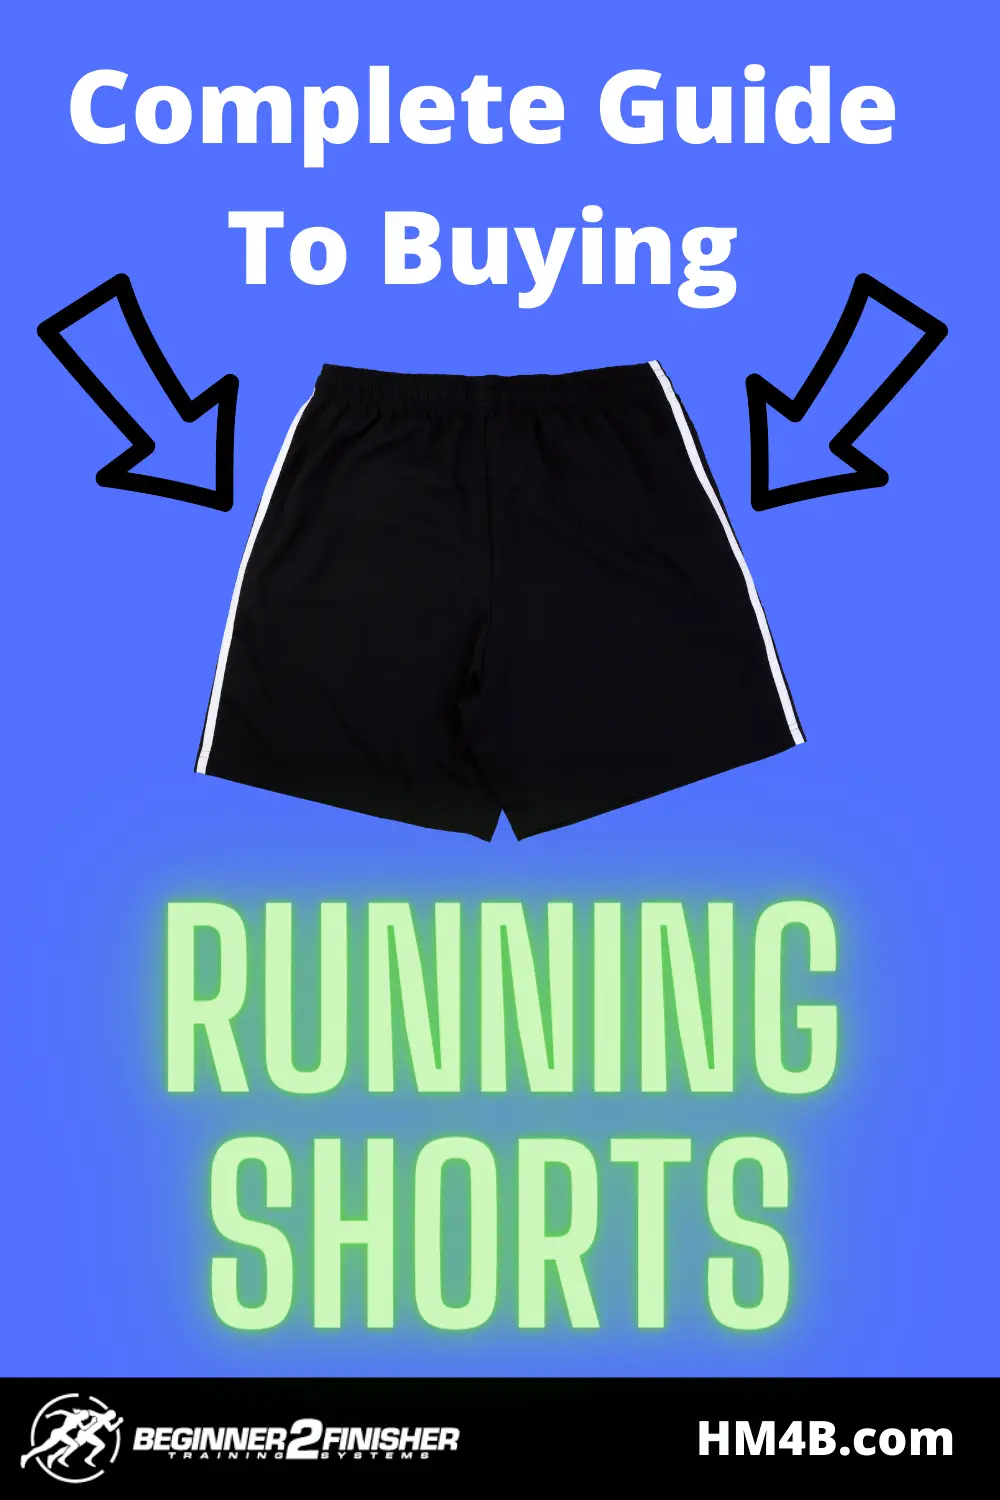 Complete Guide To Buying Running Shorts